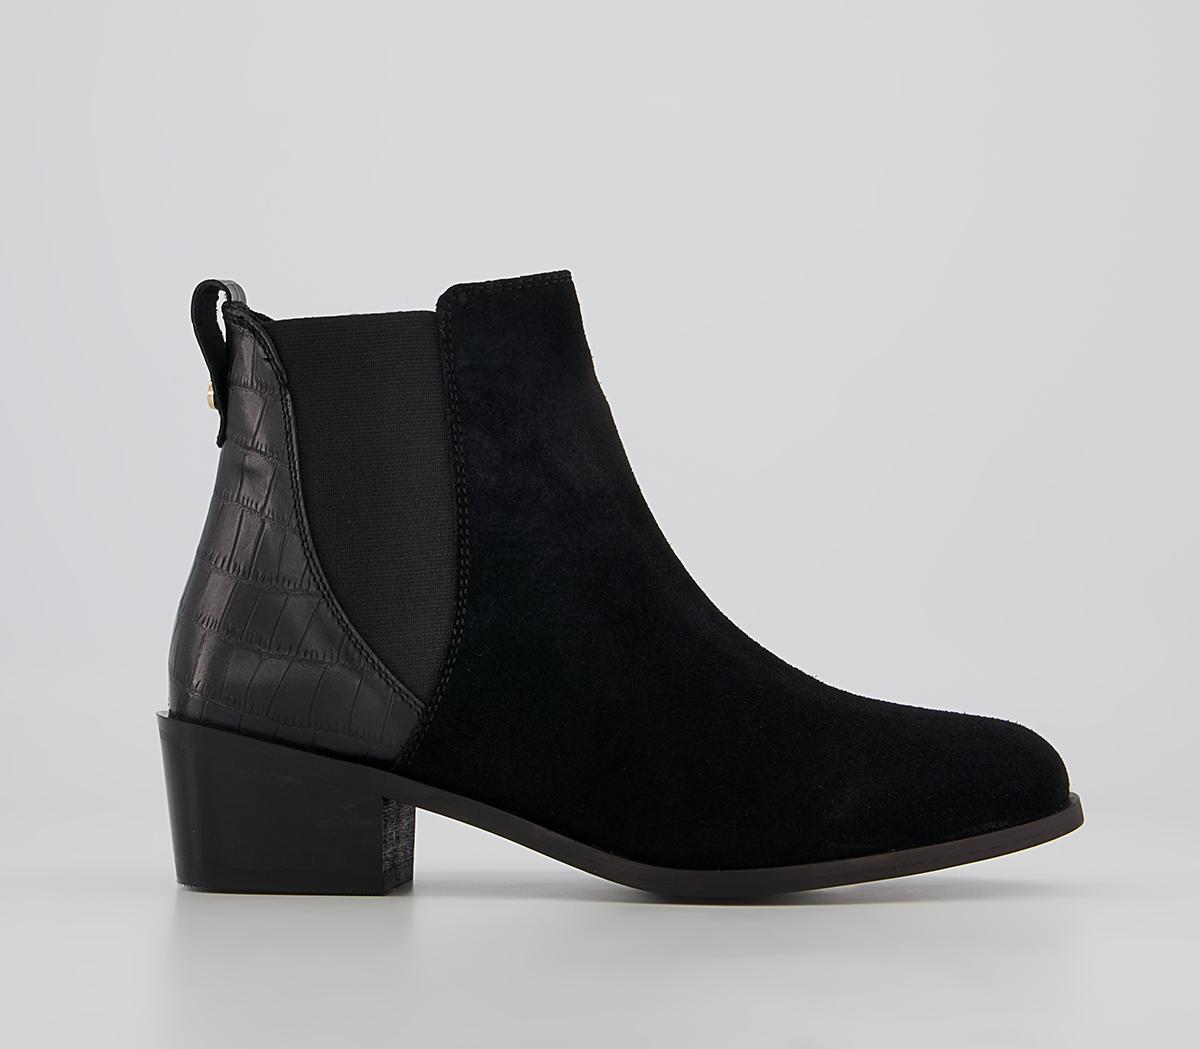 OFFICE Arkansas Almond Toe Chelsea Ankle Boots Black Suede Leather ...